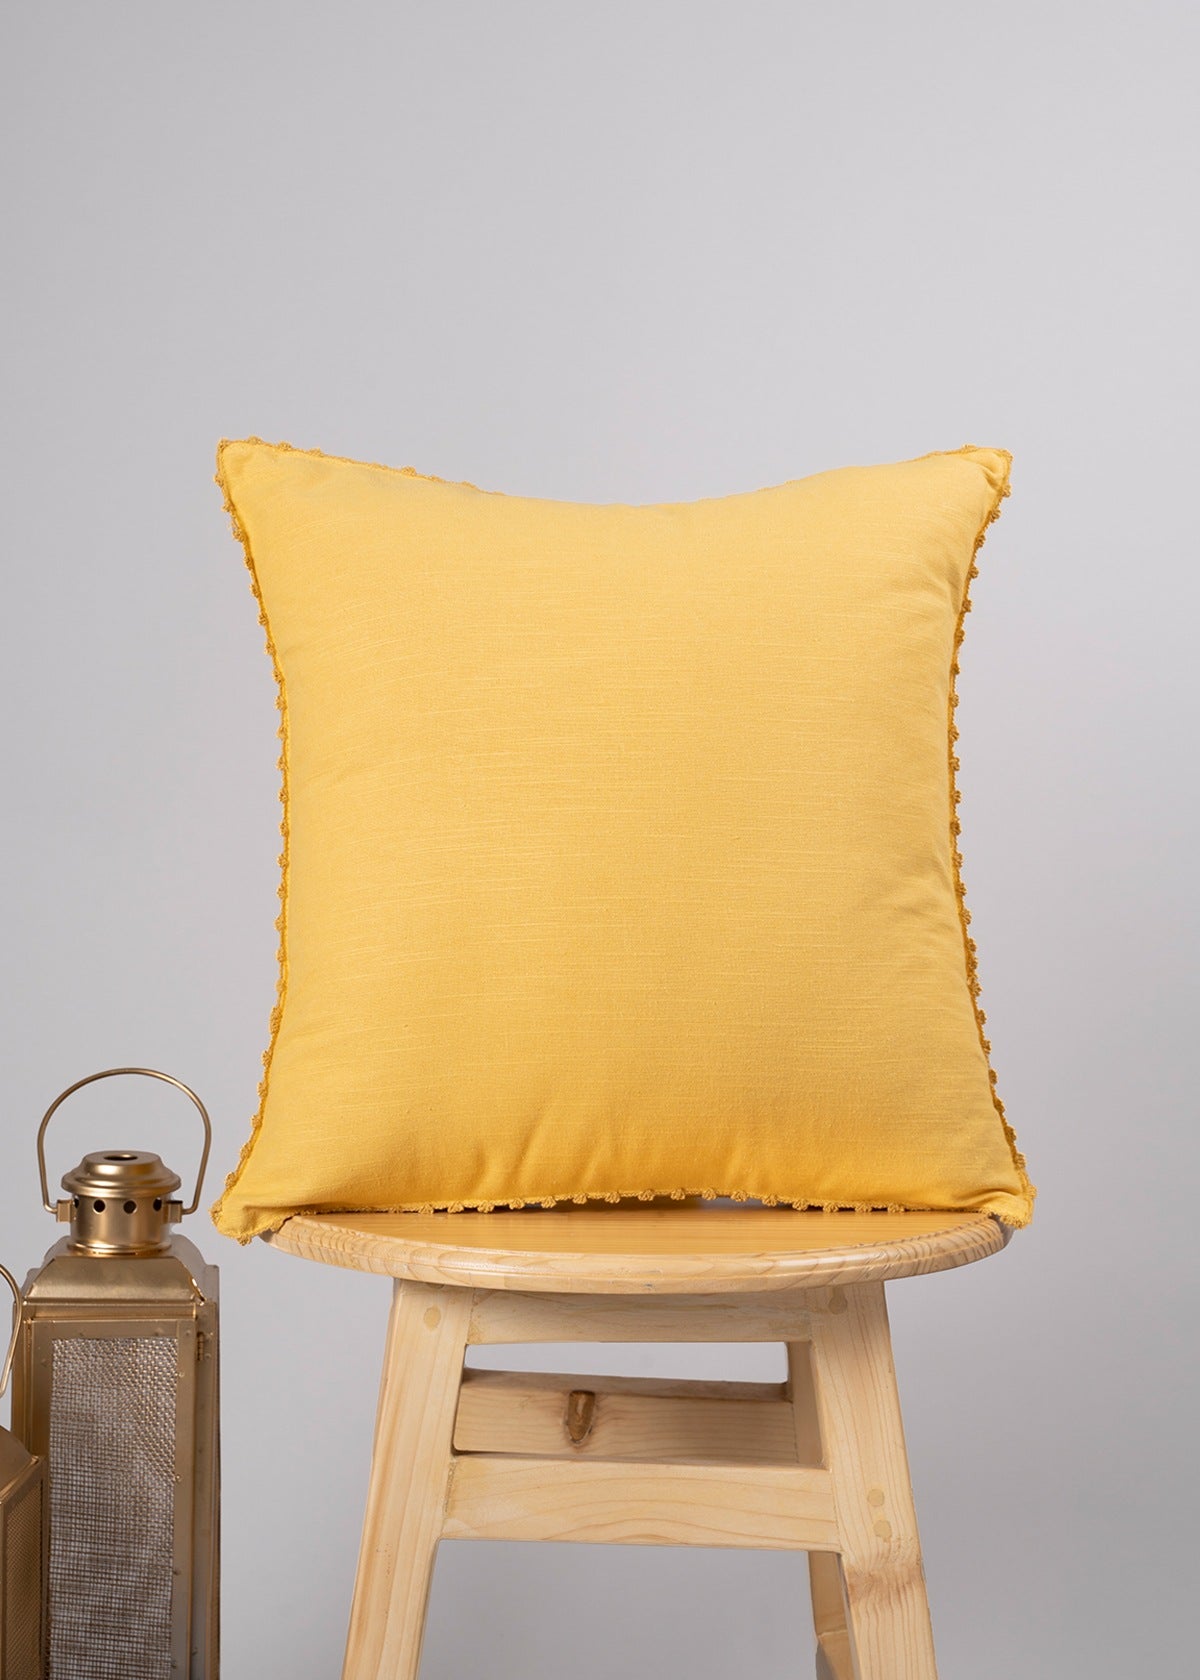 Dahlia Yellow, Mystique Marigold, Dainty Dots Yellow , Solid Mustard Set Of 4 Combo Cotton Cushion Cover - Yellow